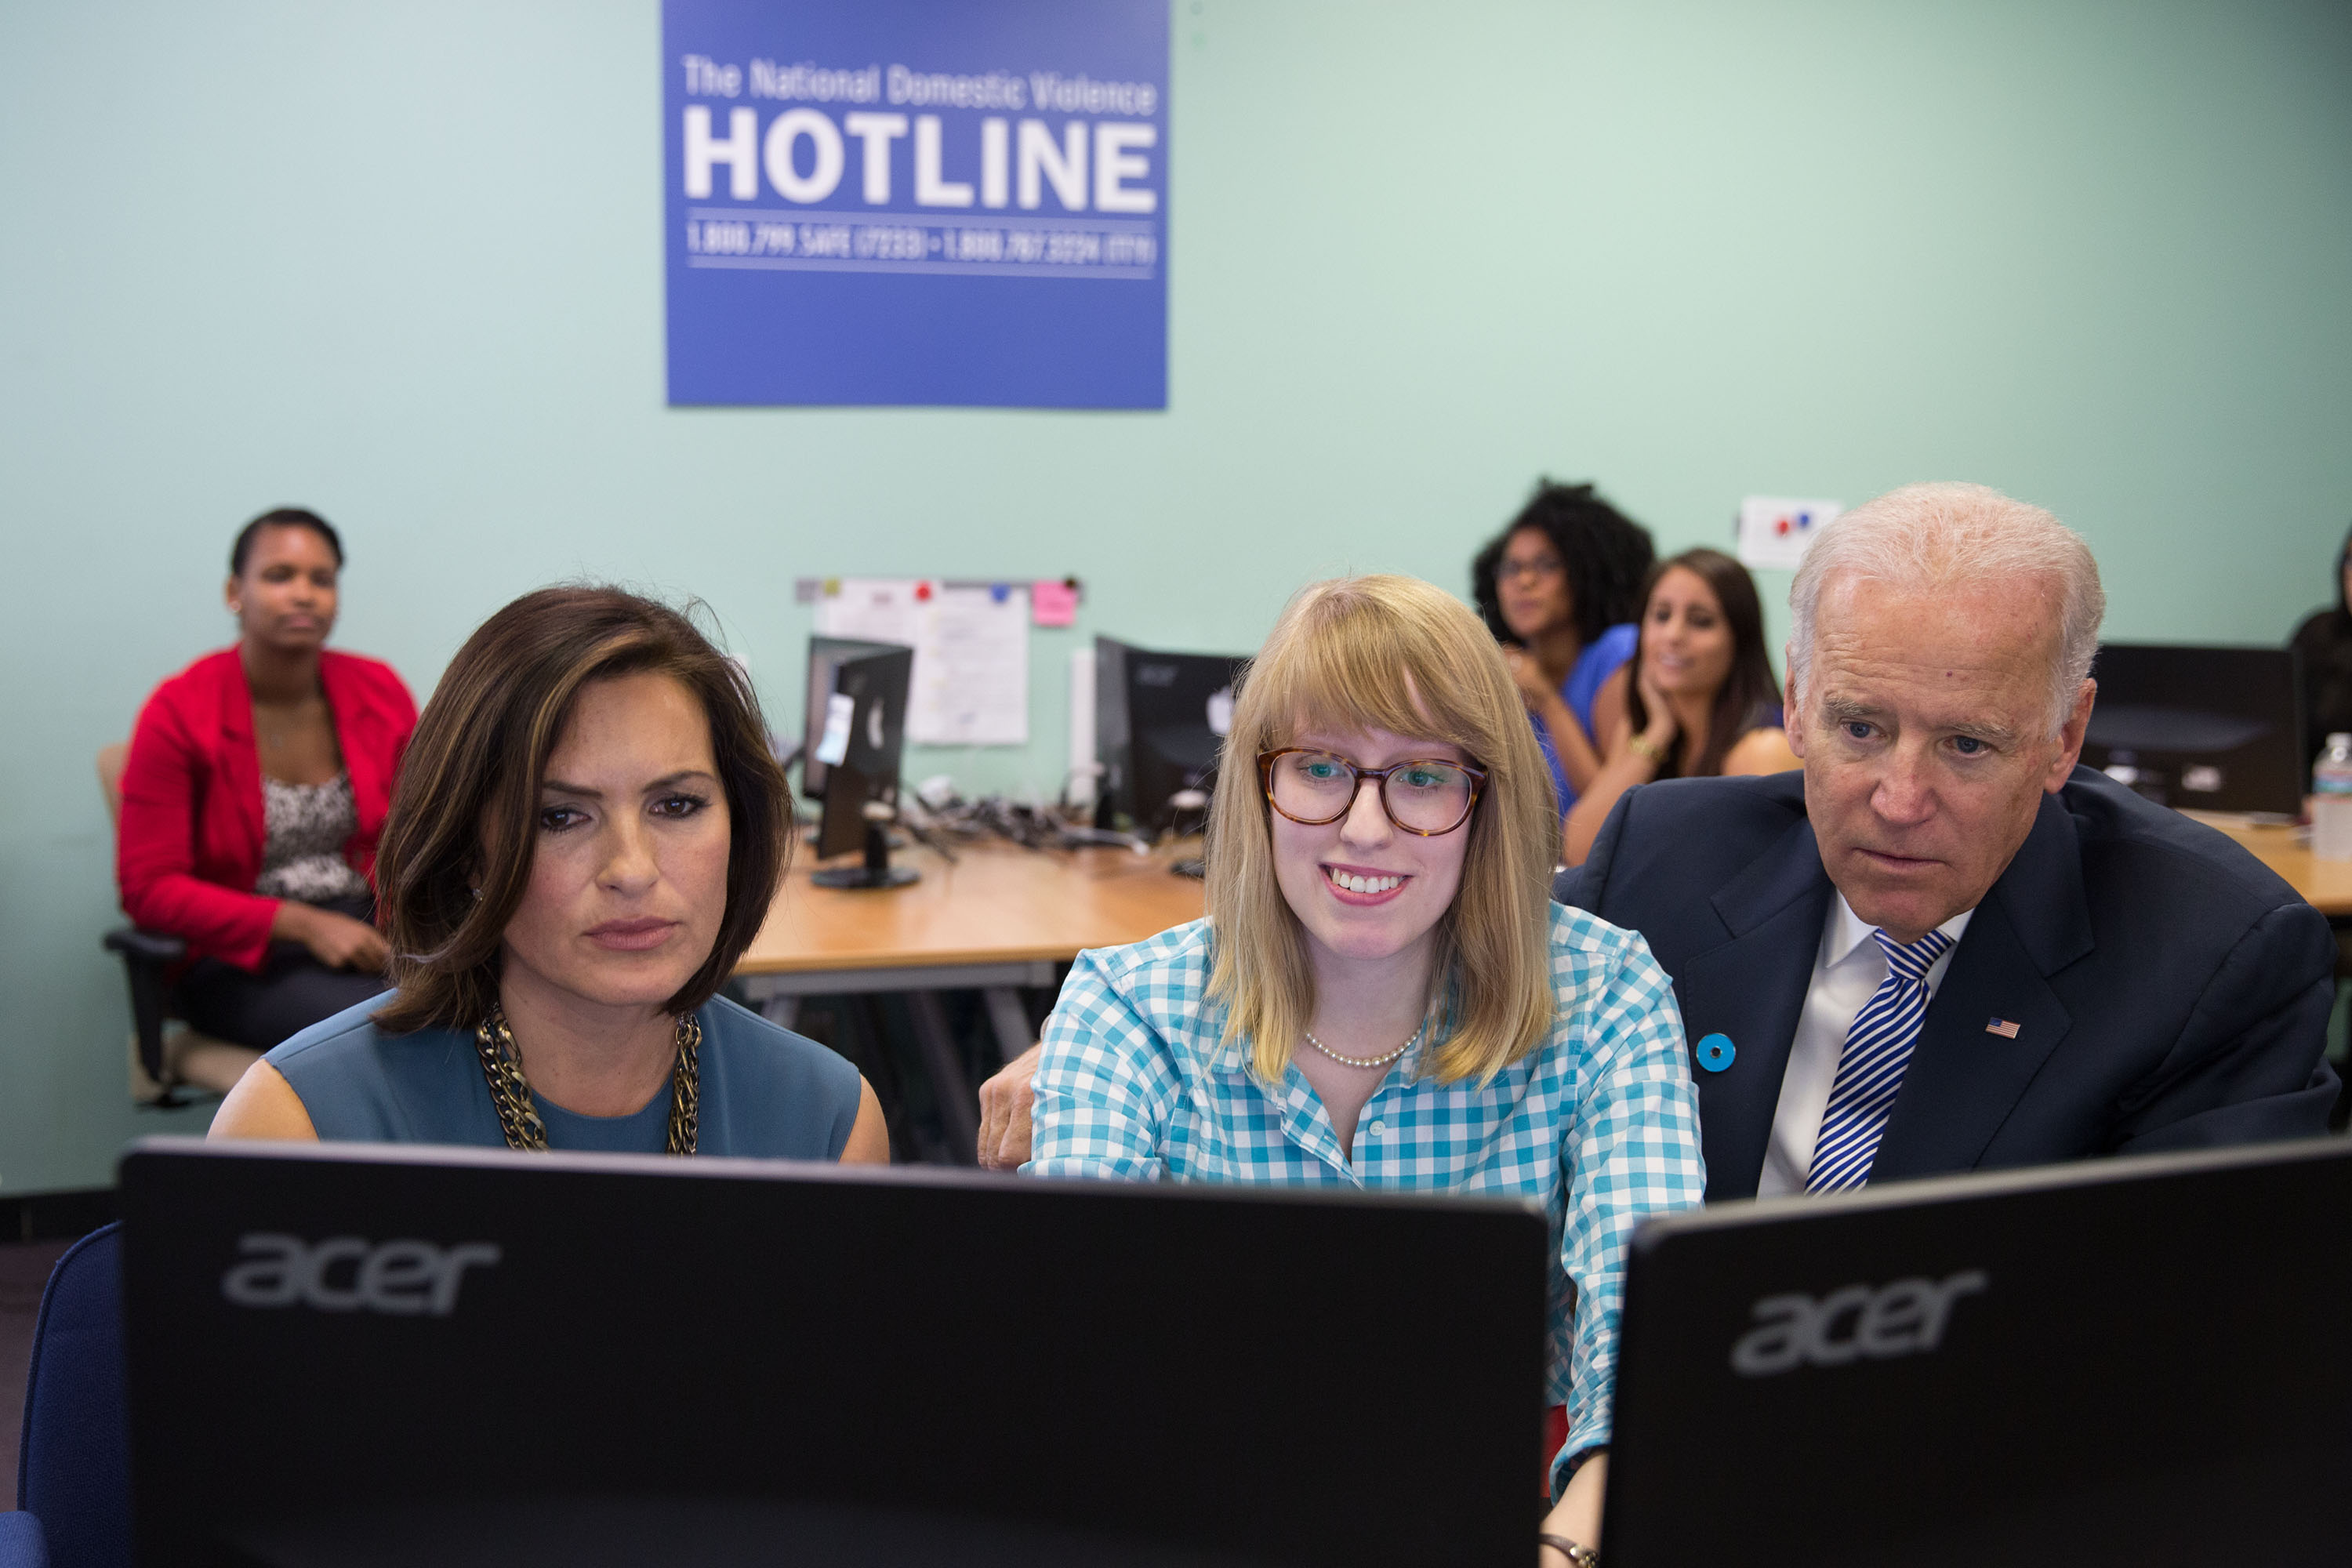 Vice President Joe Biden and Mariska Hargitay watch as an advocate demonstrates the new web chat feature, at the National Domestic Violence Hotline